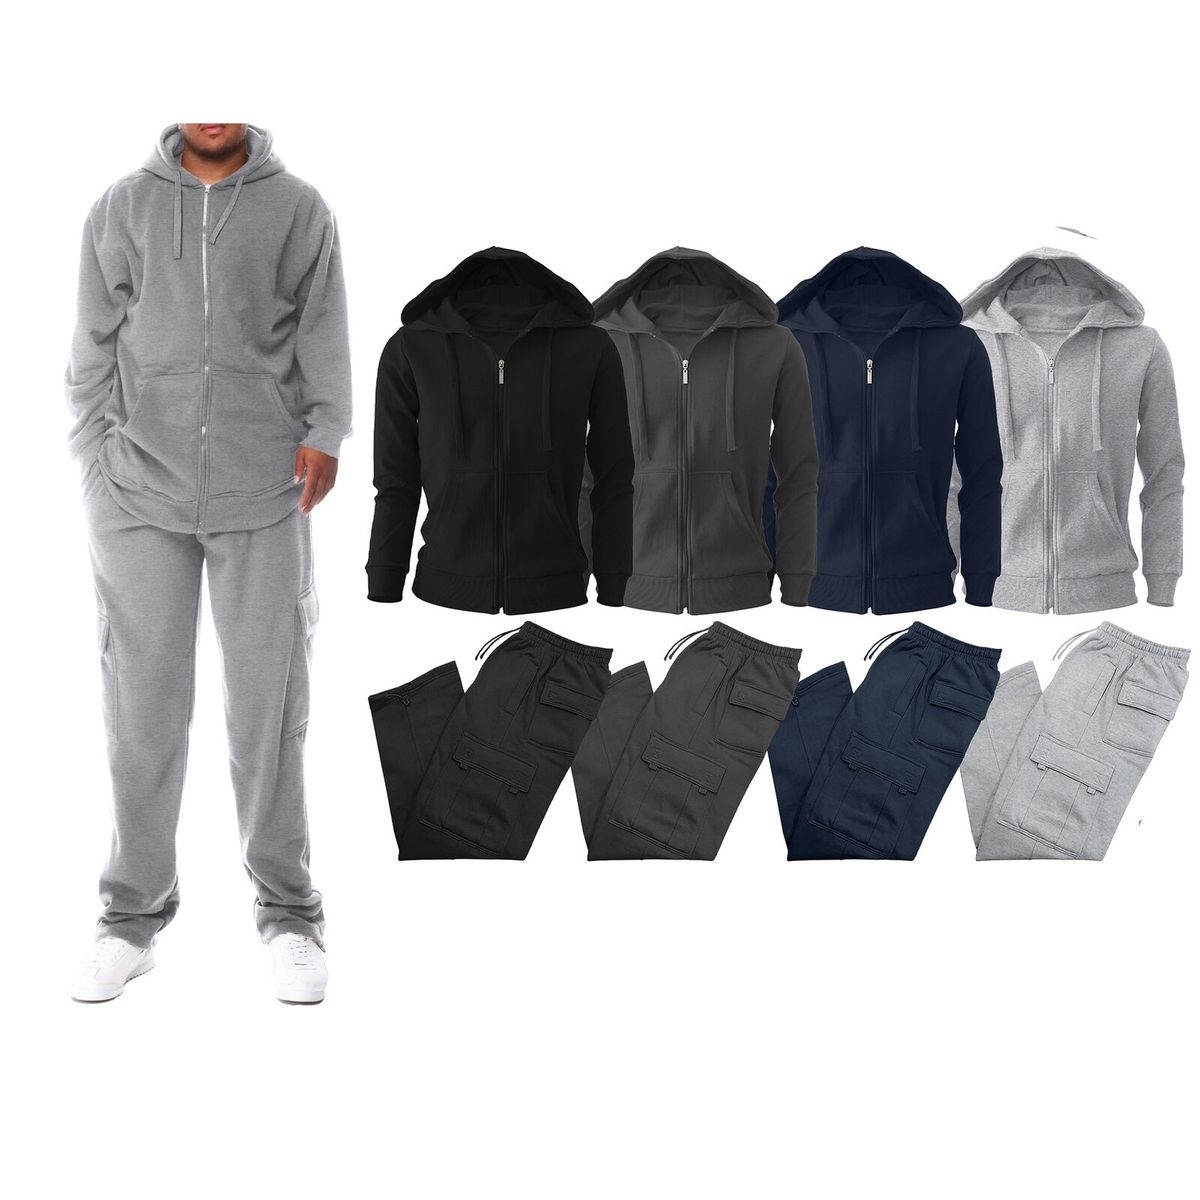 Multi-Pack: Men's Big & Tall Winter Warm Athletic Active Cozy Fleece Lined Multi-Pocket Full Zip Up Cargo Tracksuit - Grey, 2-pack, Large